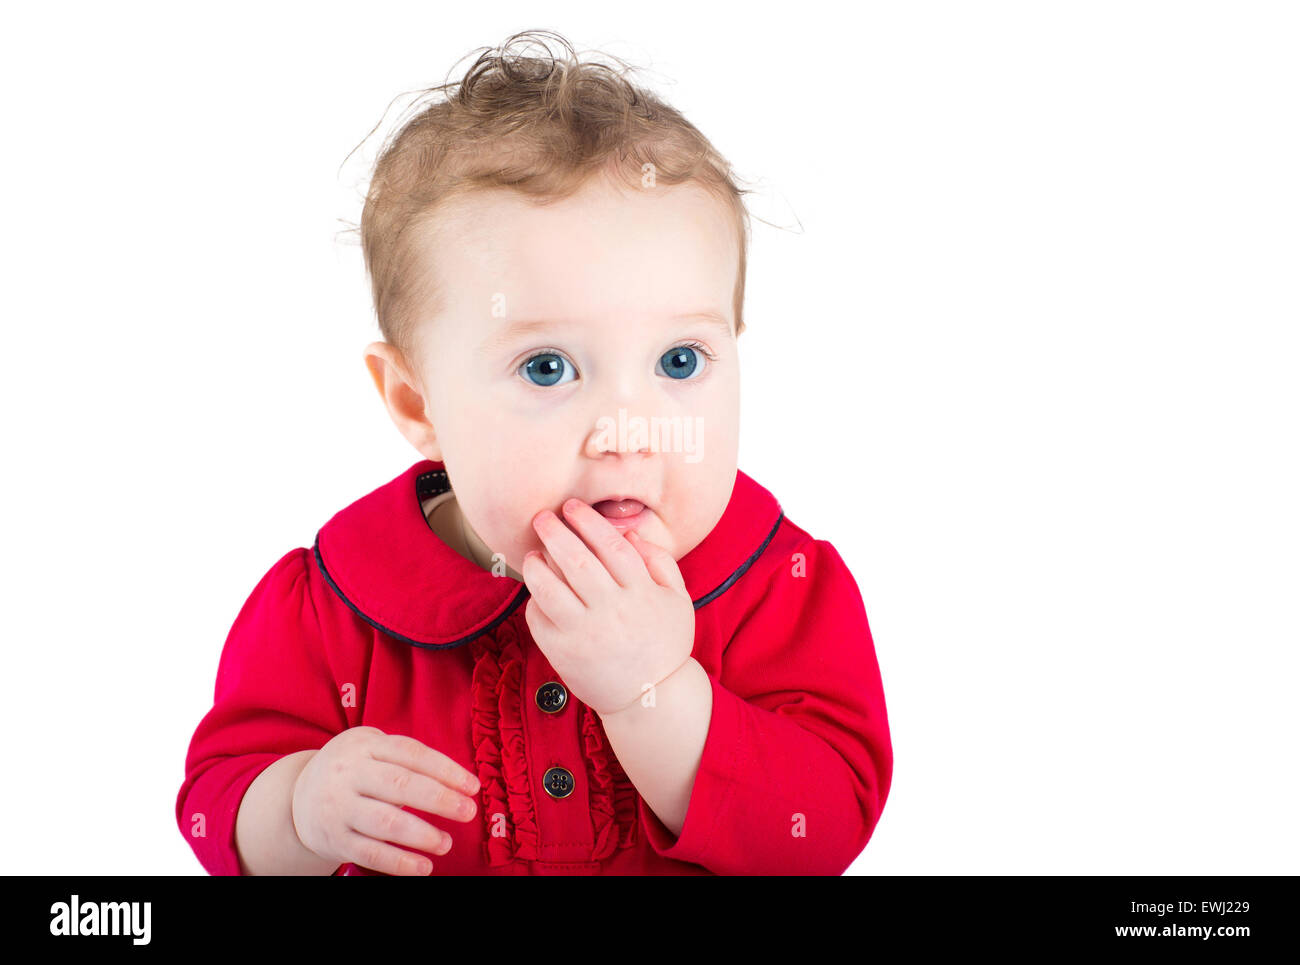 Close up portrait of a beautiful baby girl with big blue eyes wearing a red dress, isolated on white Stock Photo